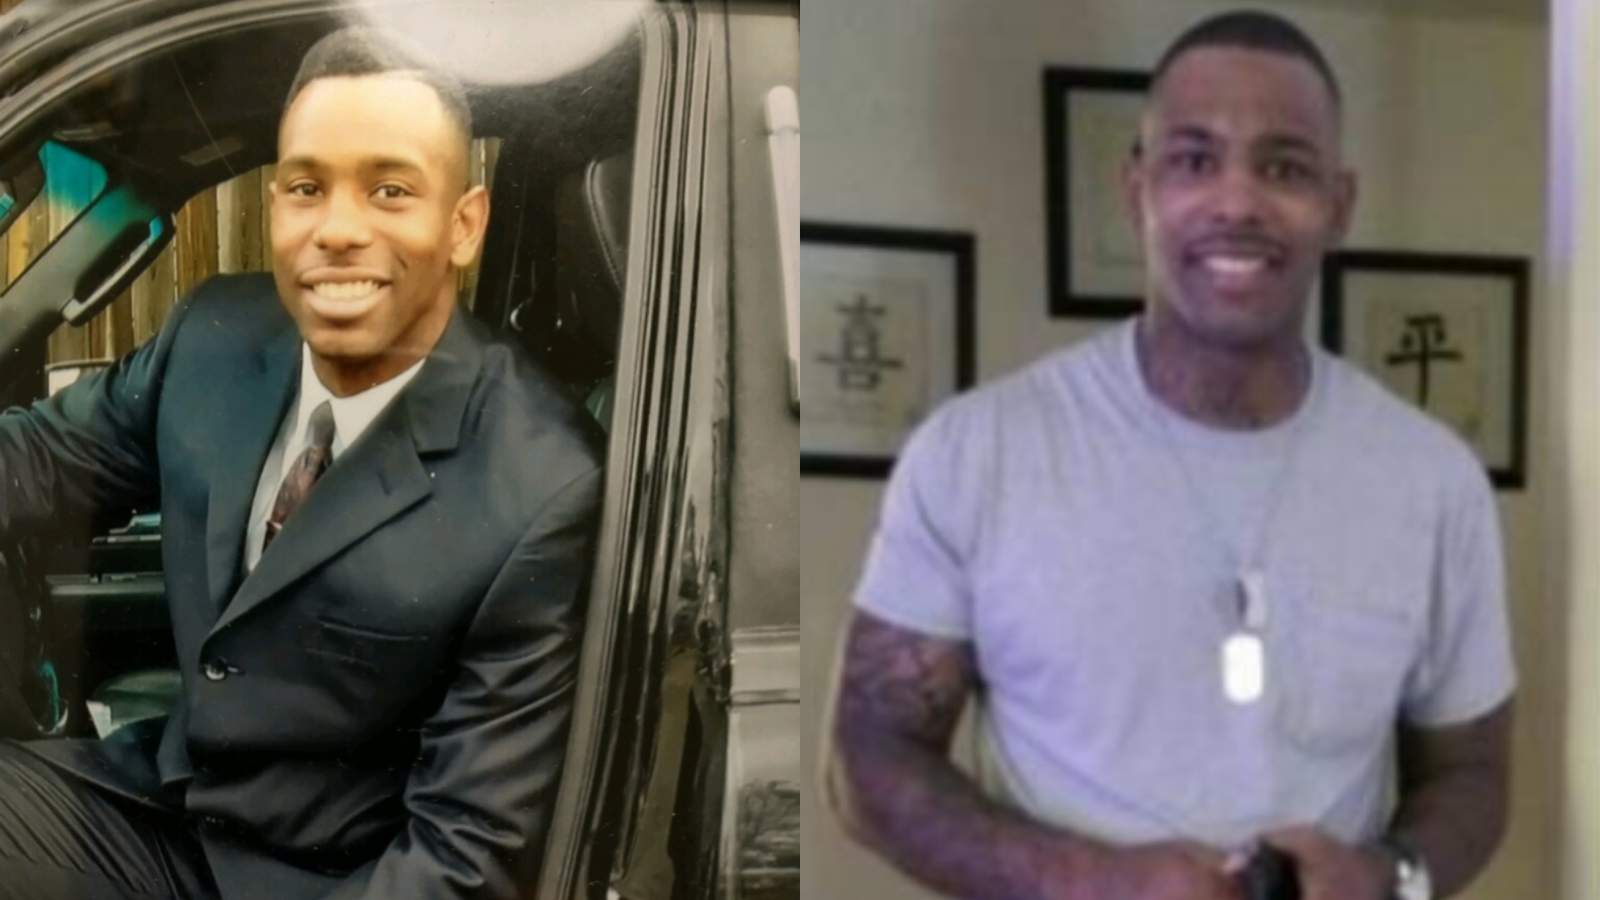 33-year-old veteran missing from Houston home since October, mother says